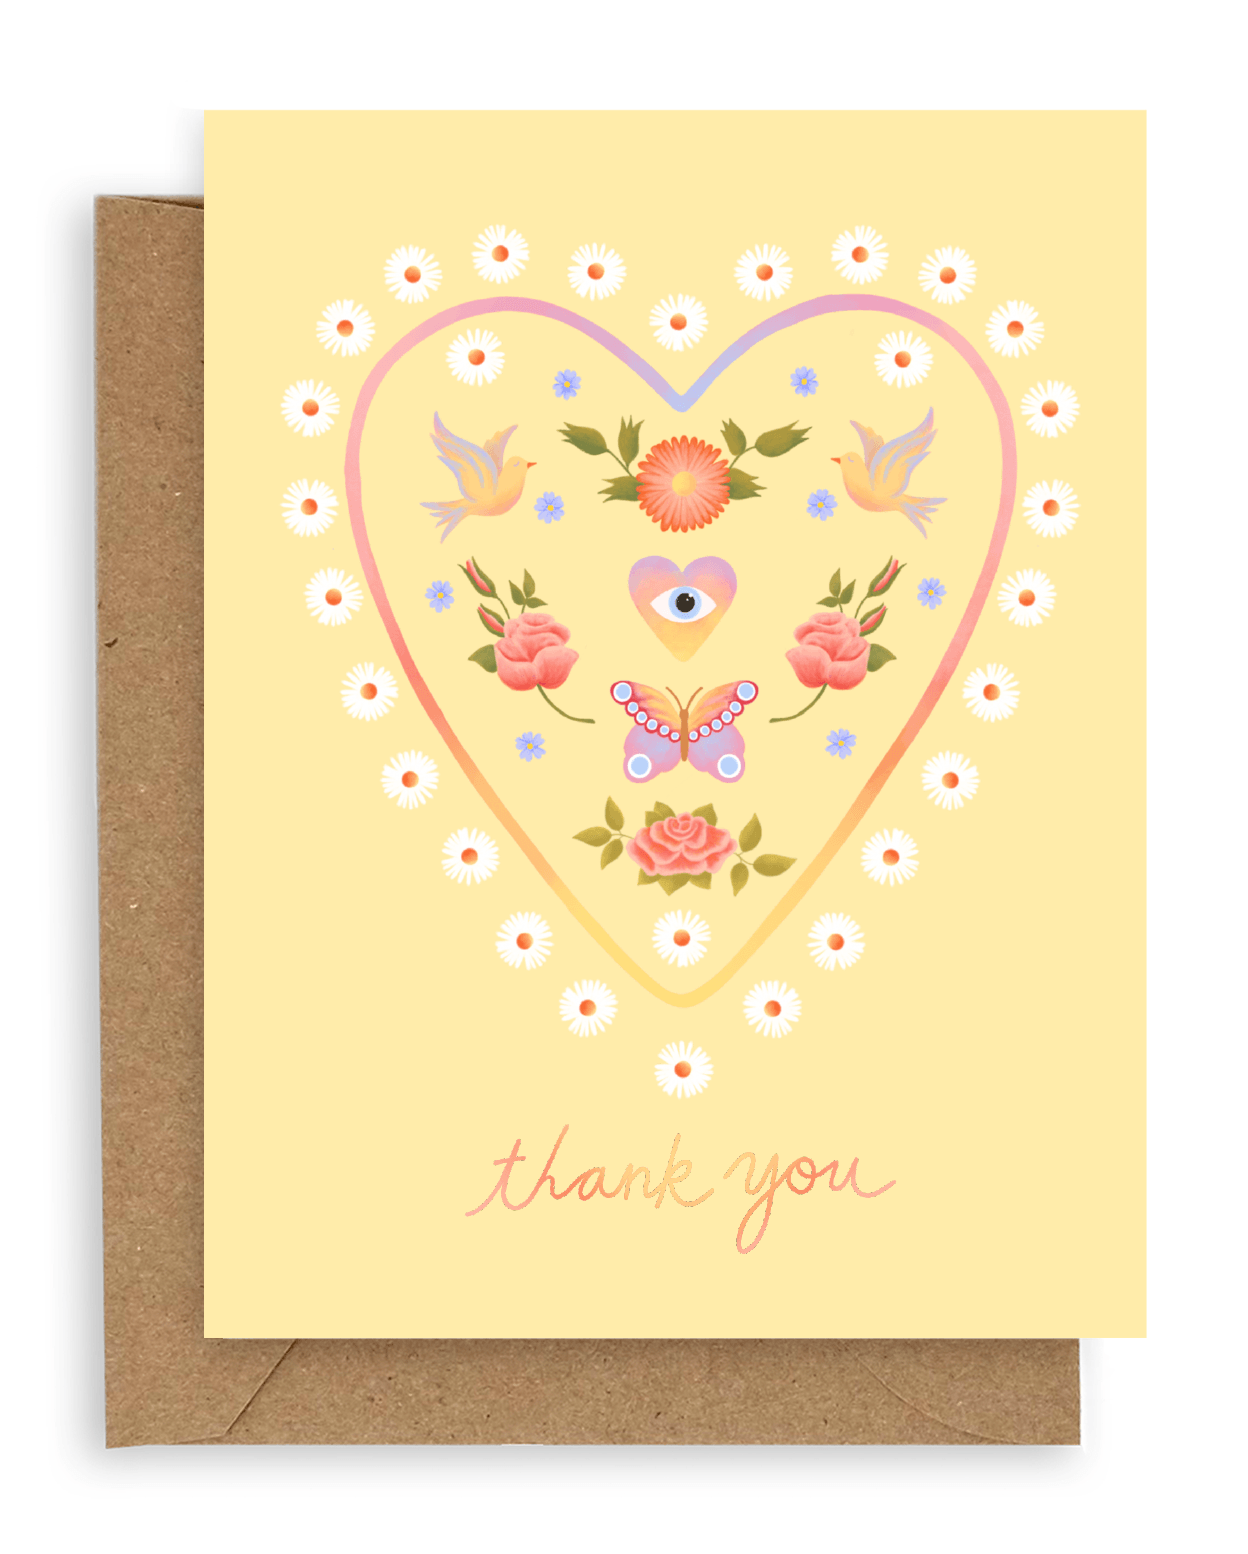 A heart filled with doves, flowers, and hearts with eyes printed on a custard colored background. Shown with kraft envelope.